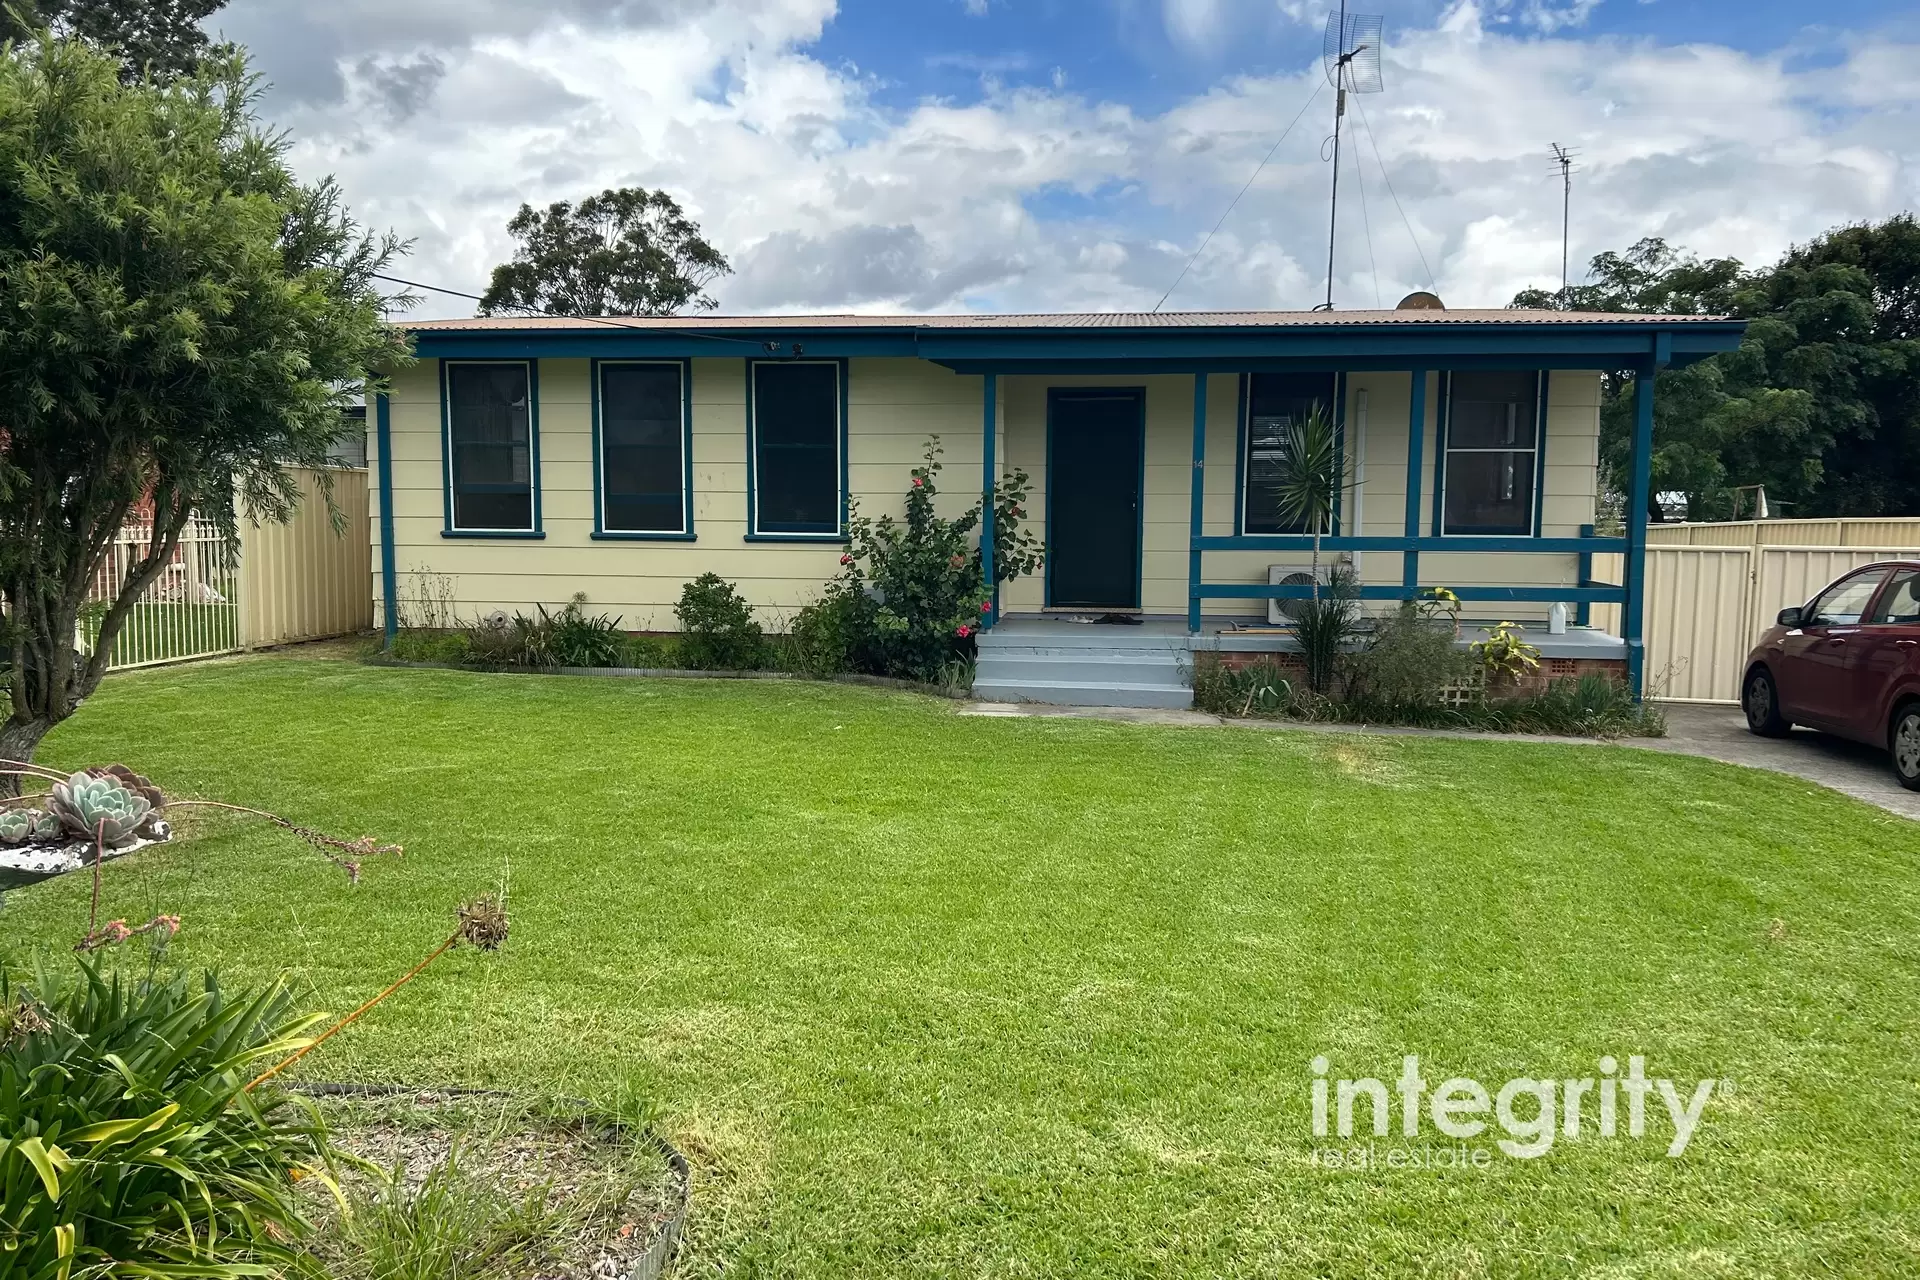 14 Quiberon Street, Nowra For Lease by Integrity Real Estate